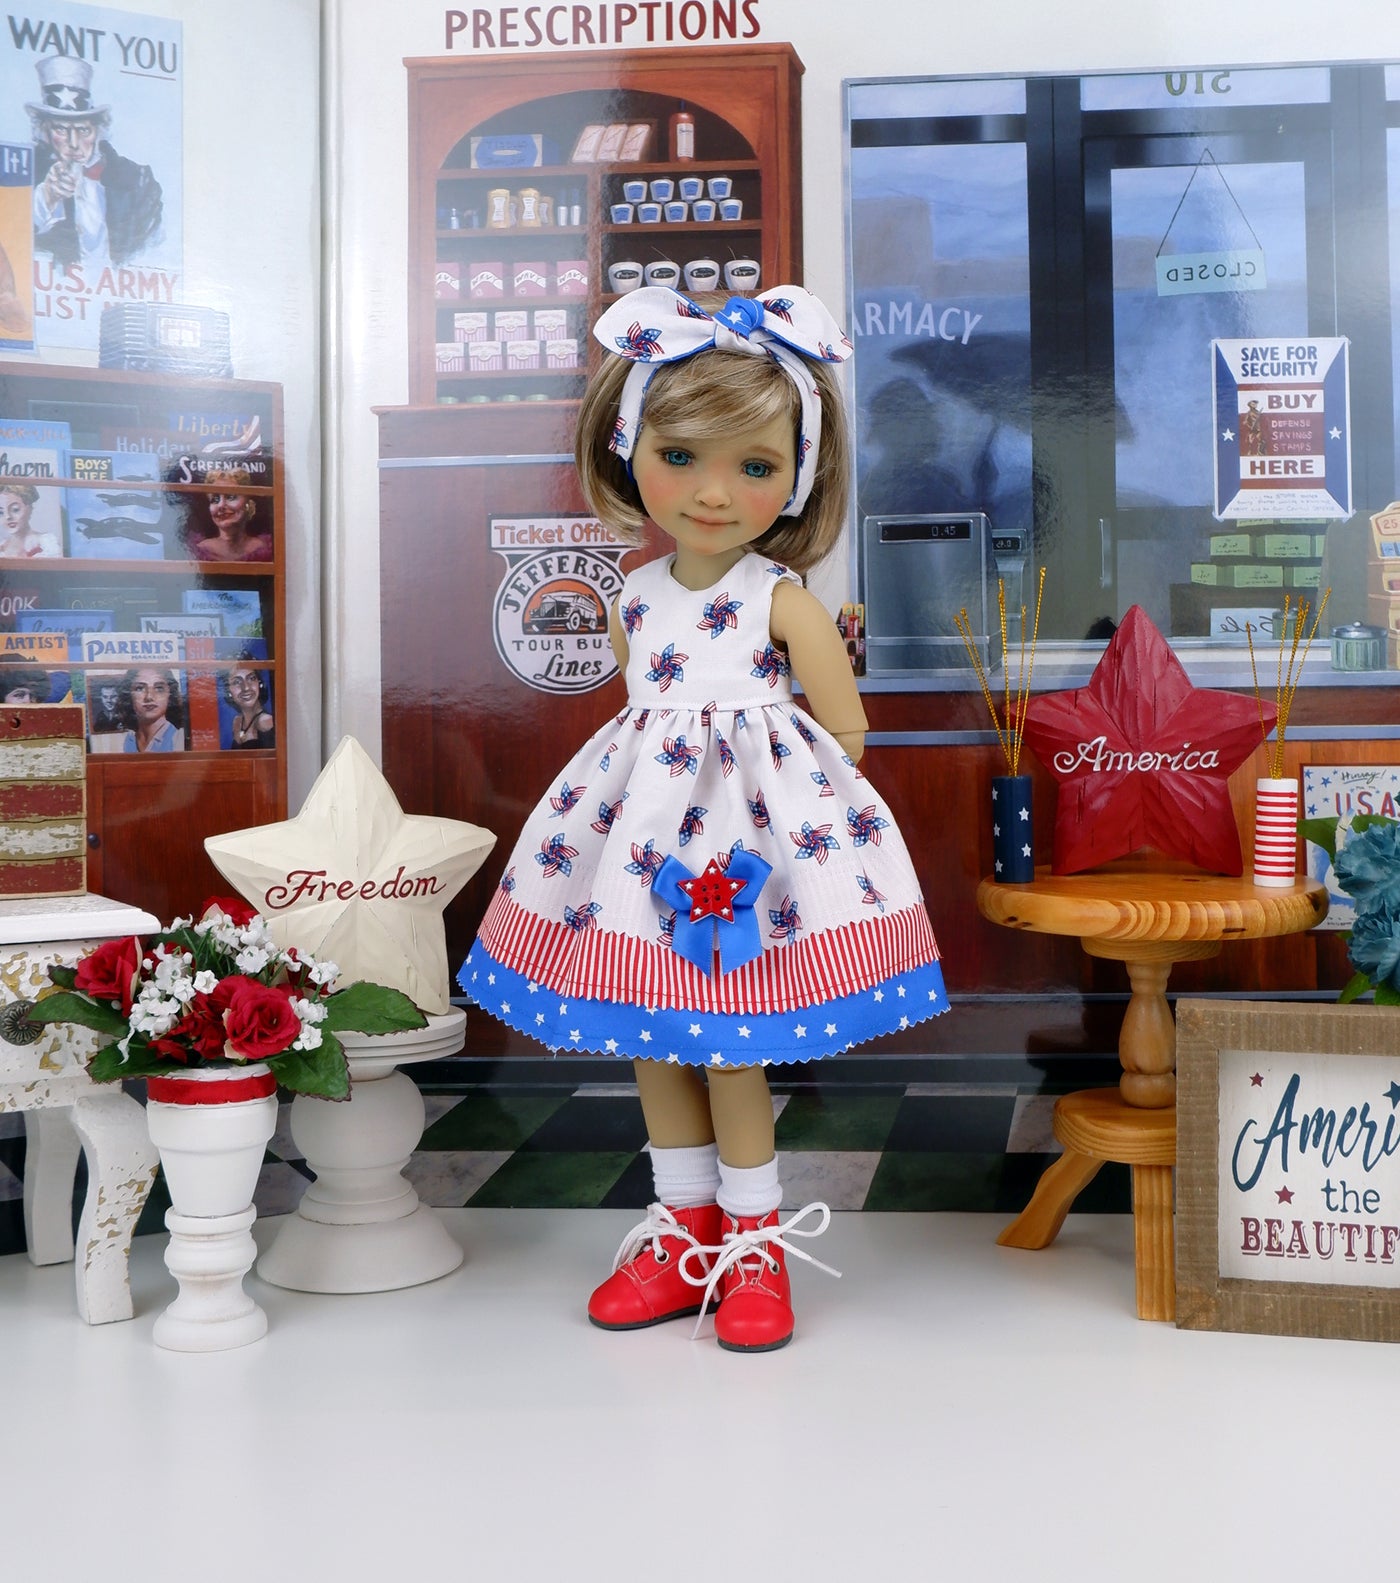 Freedom Pinwheel - dress with boots for Ruby Red Fashion Friends doll